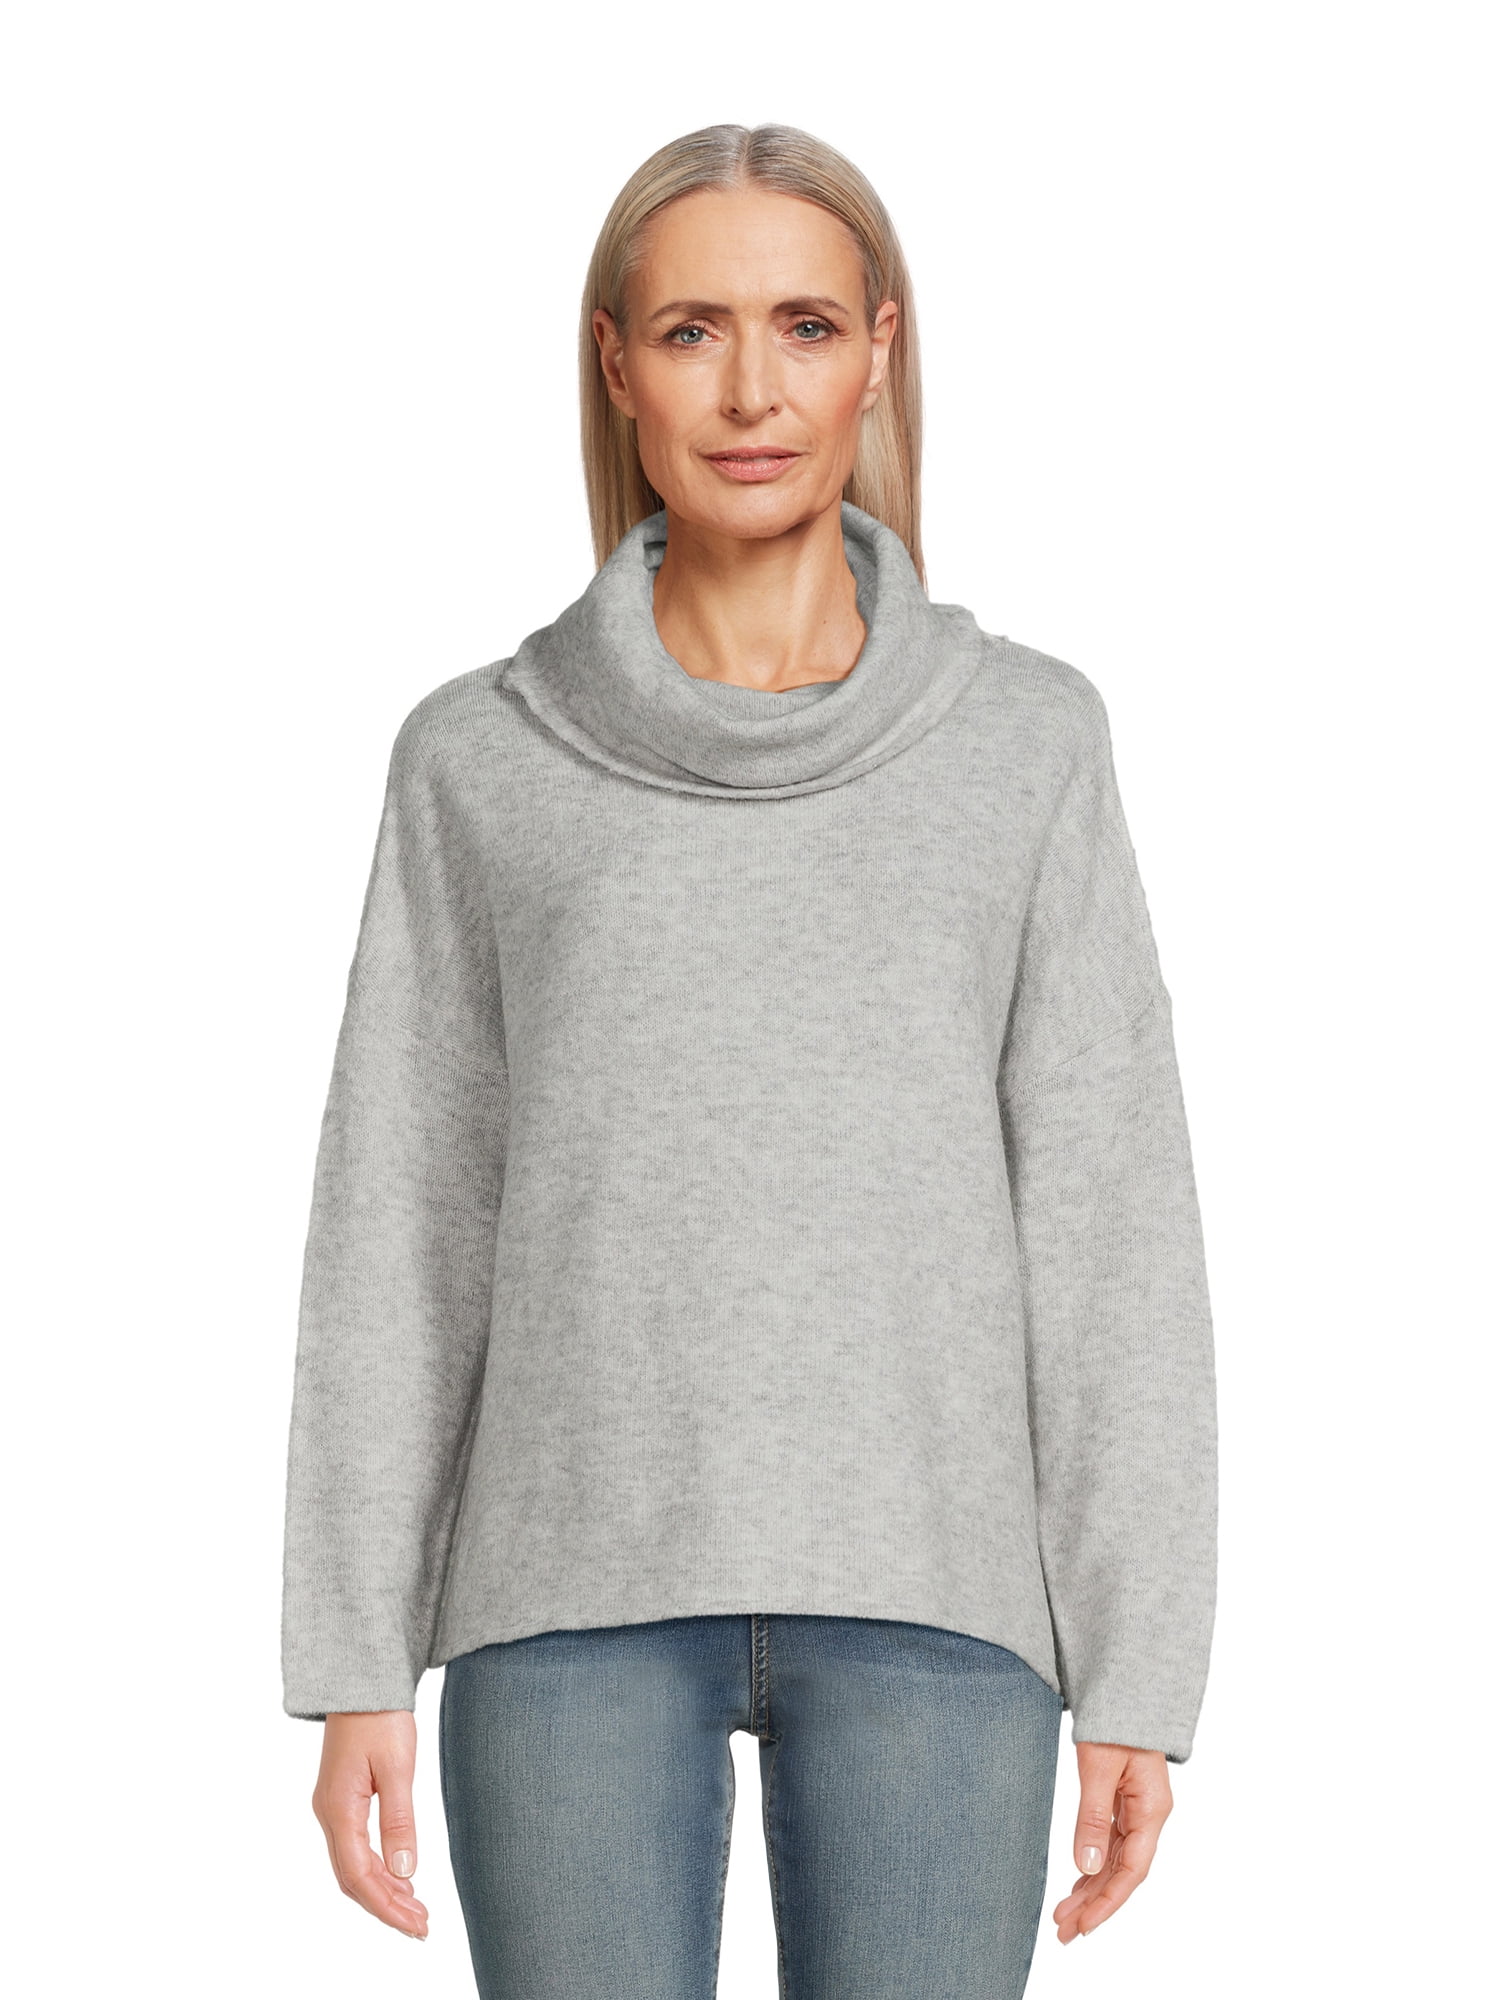 Dreamers by Debut Womens Cowl Neck Pullover Long Sleeve Sweater 